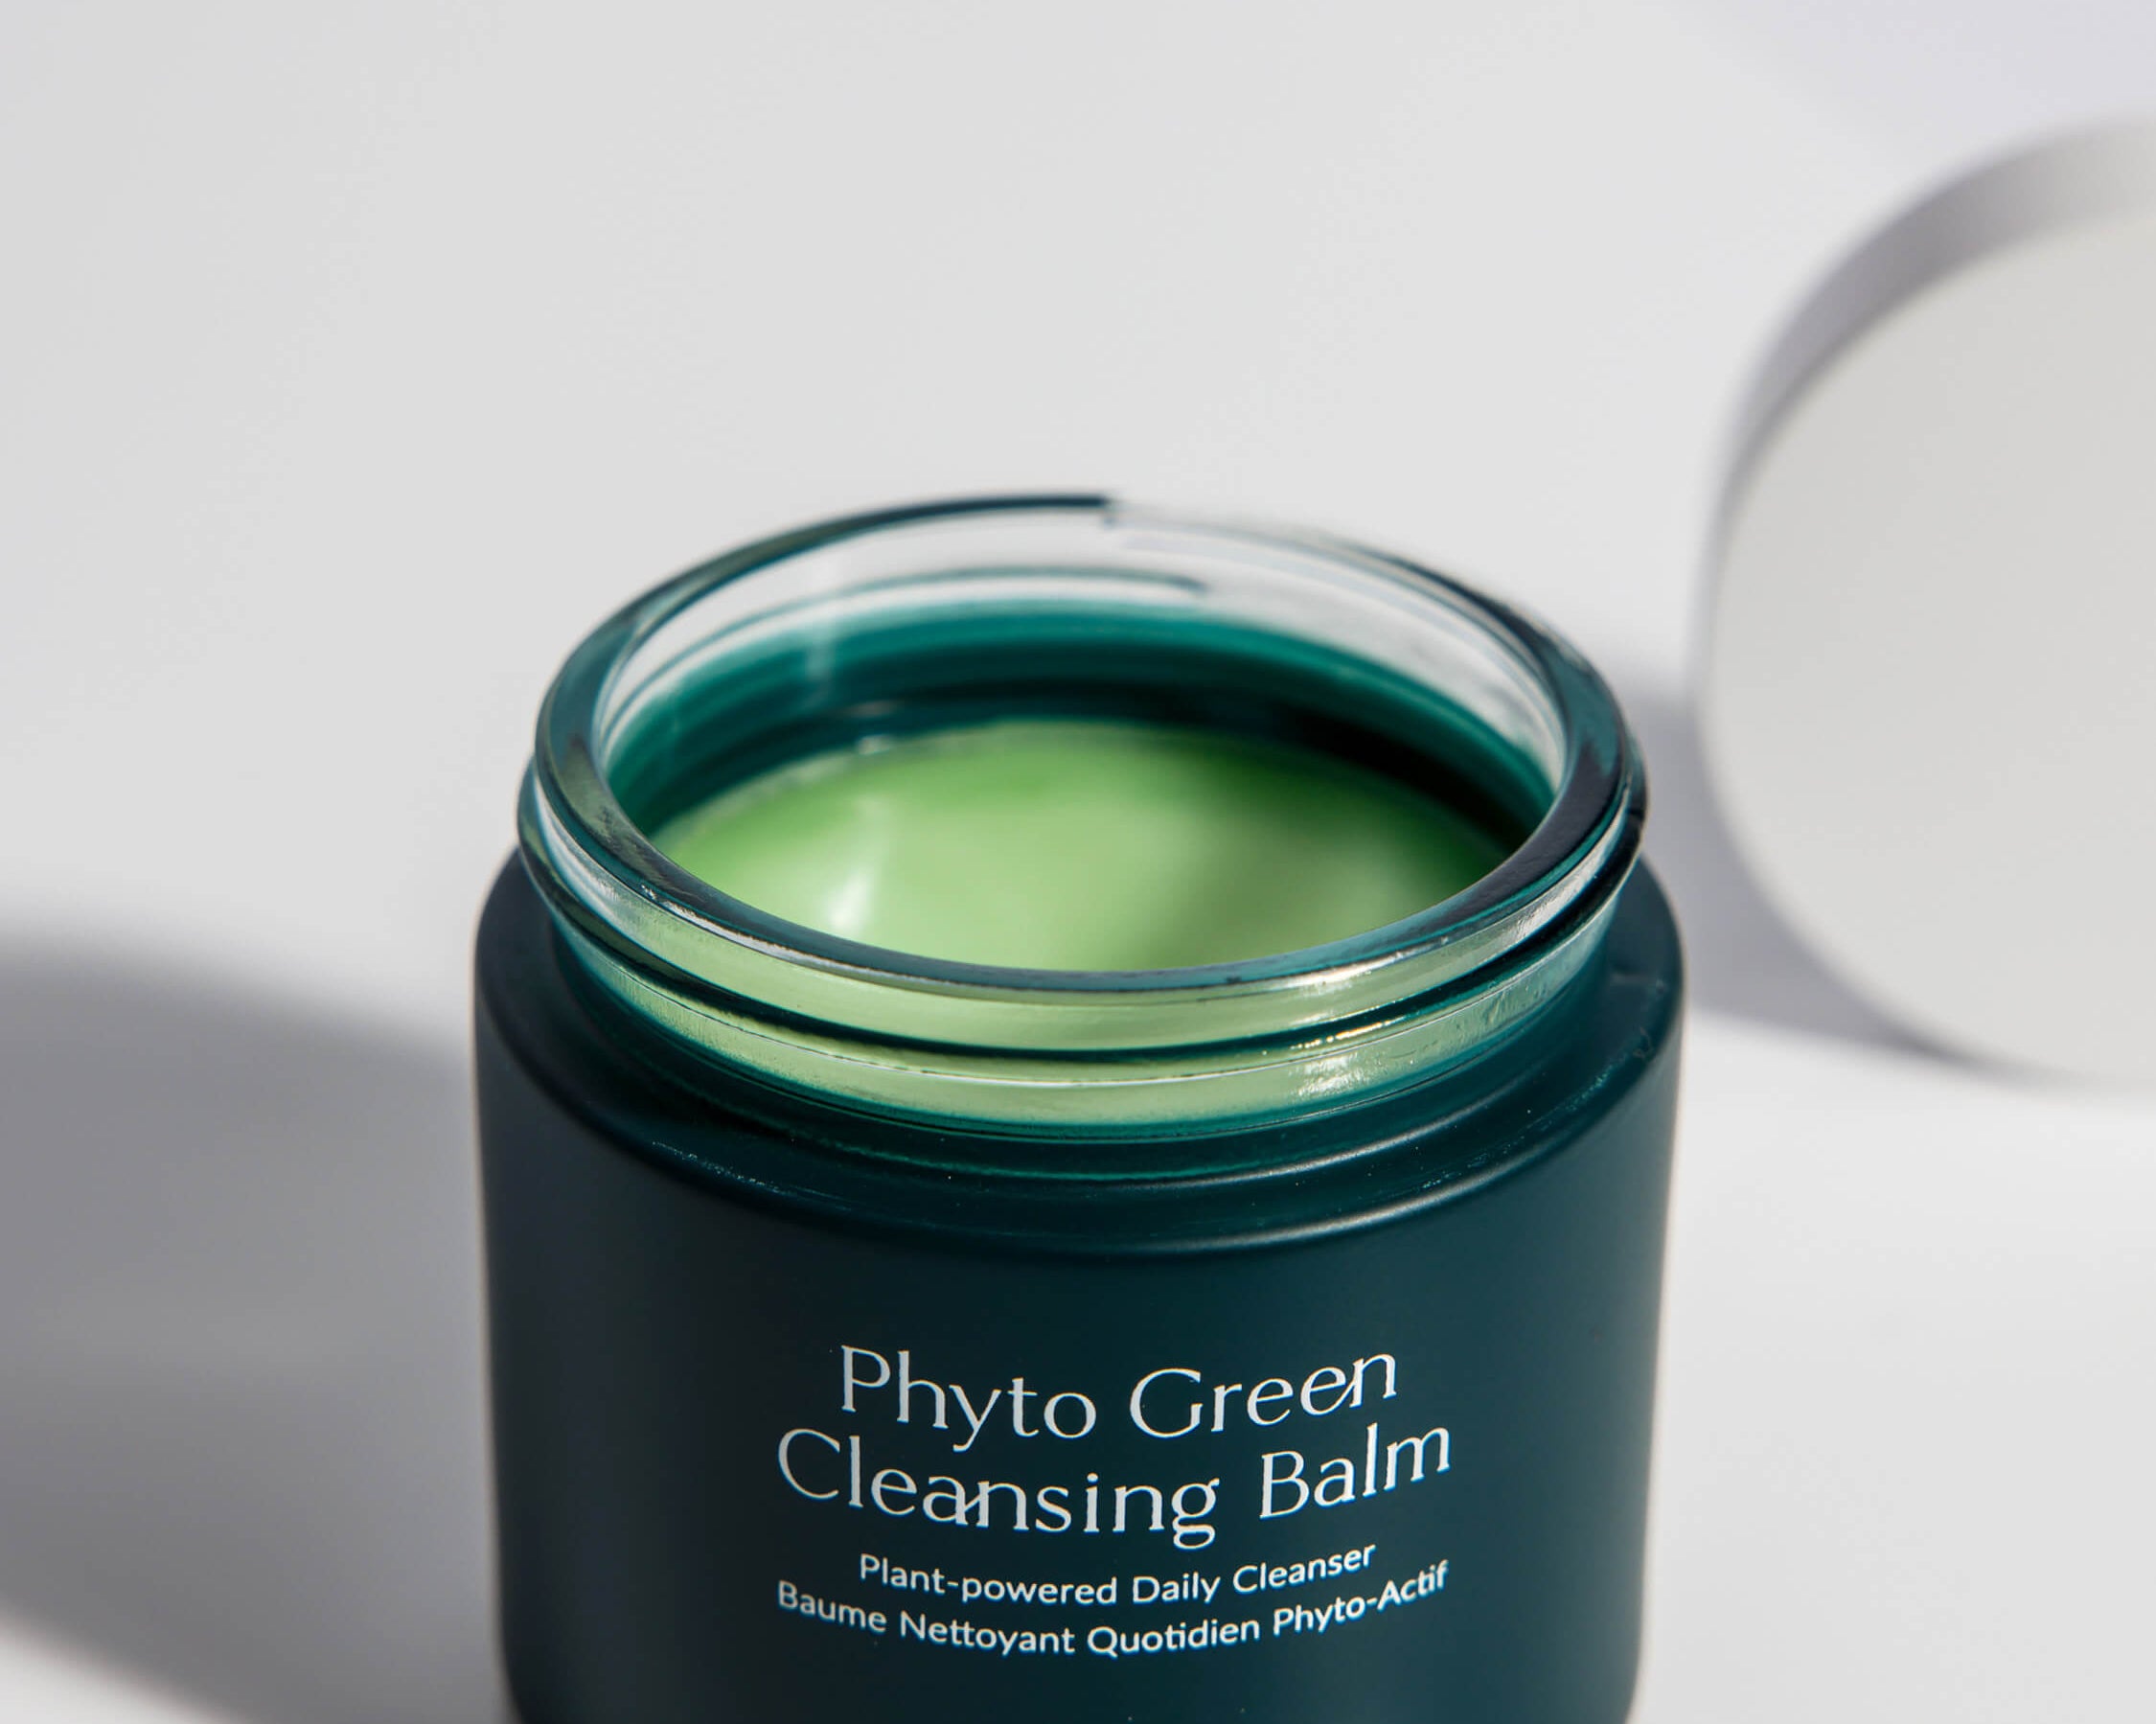 WYLYS Phyto Green Complete Cleansing Balm When You Love Your Skin